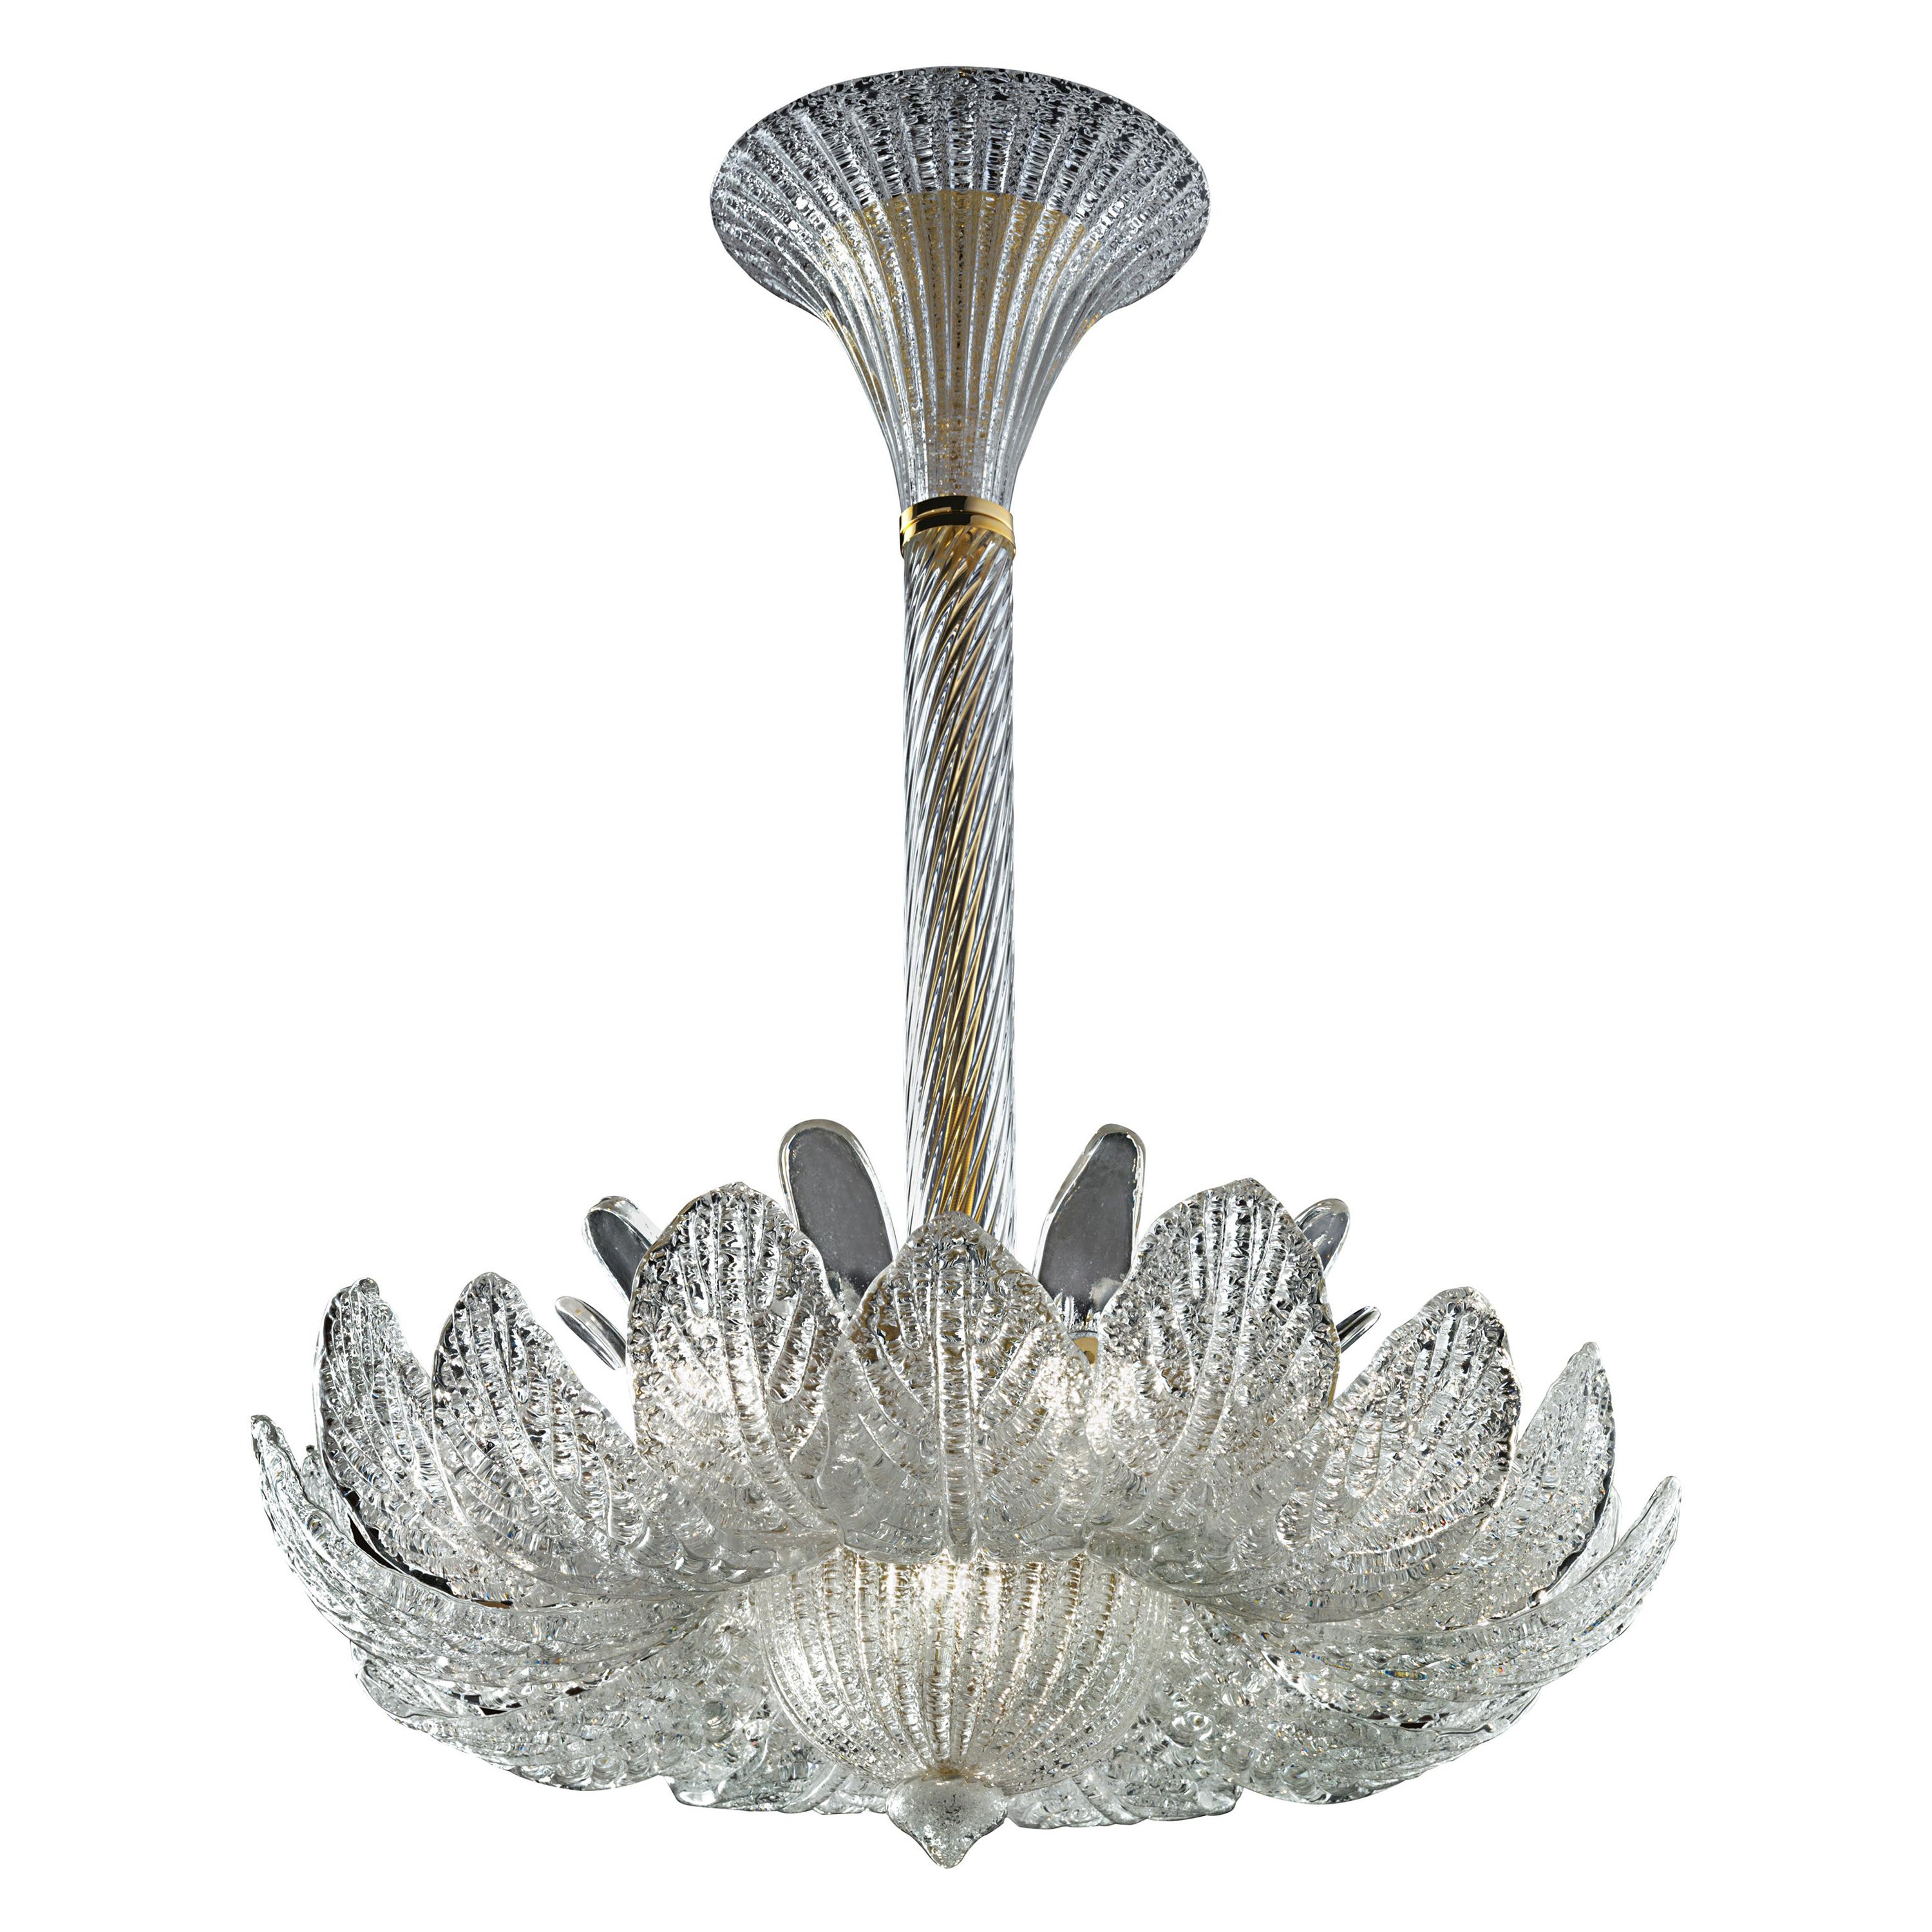 Rex 5359 Suspension Lamp in Glass and Polished Chrome, by Barovier&Toso